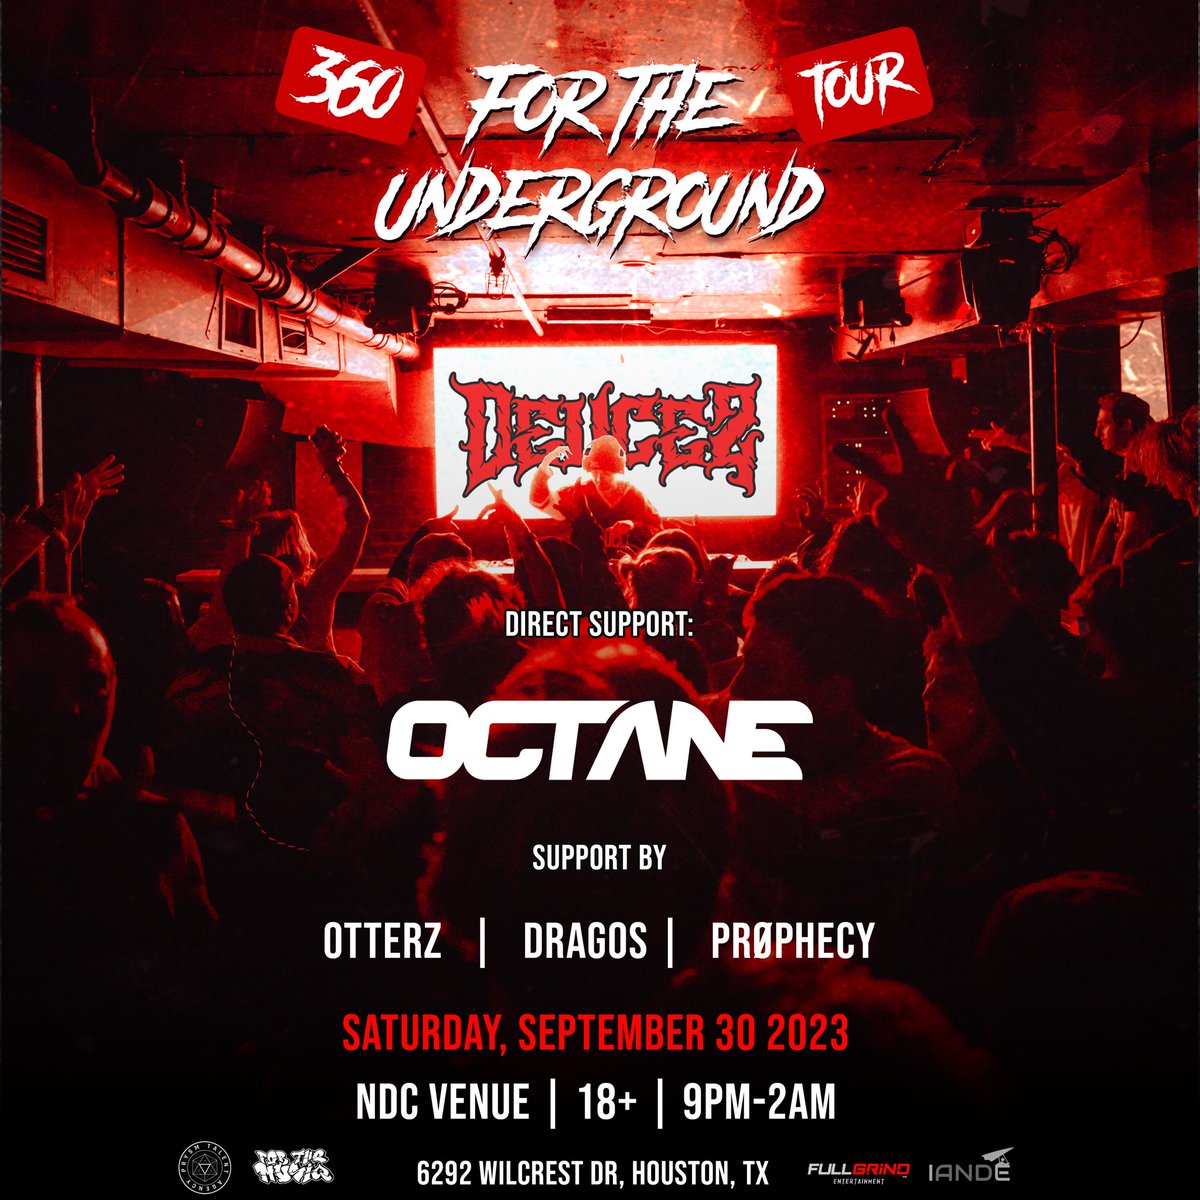 JUST ANNOUNCED: @WeAreDeucez in Houston MF Texas along with the young master @OctaneDubz more on 9/30! ✌️